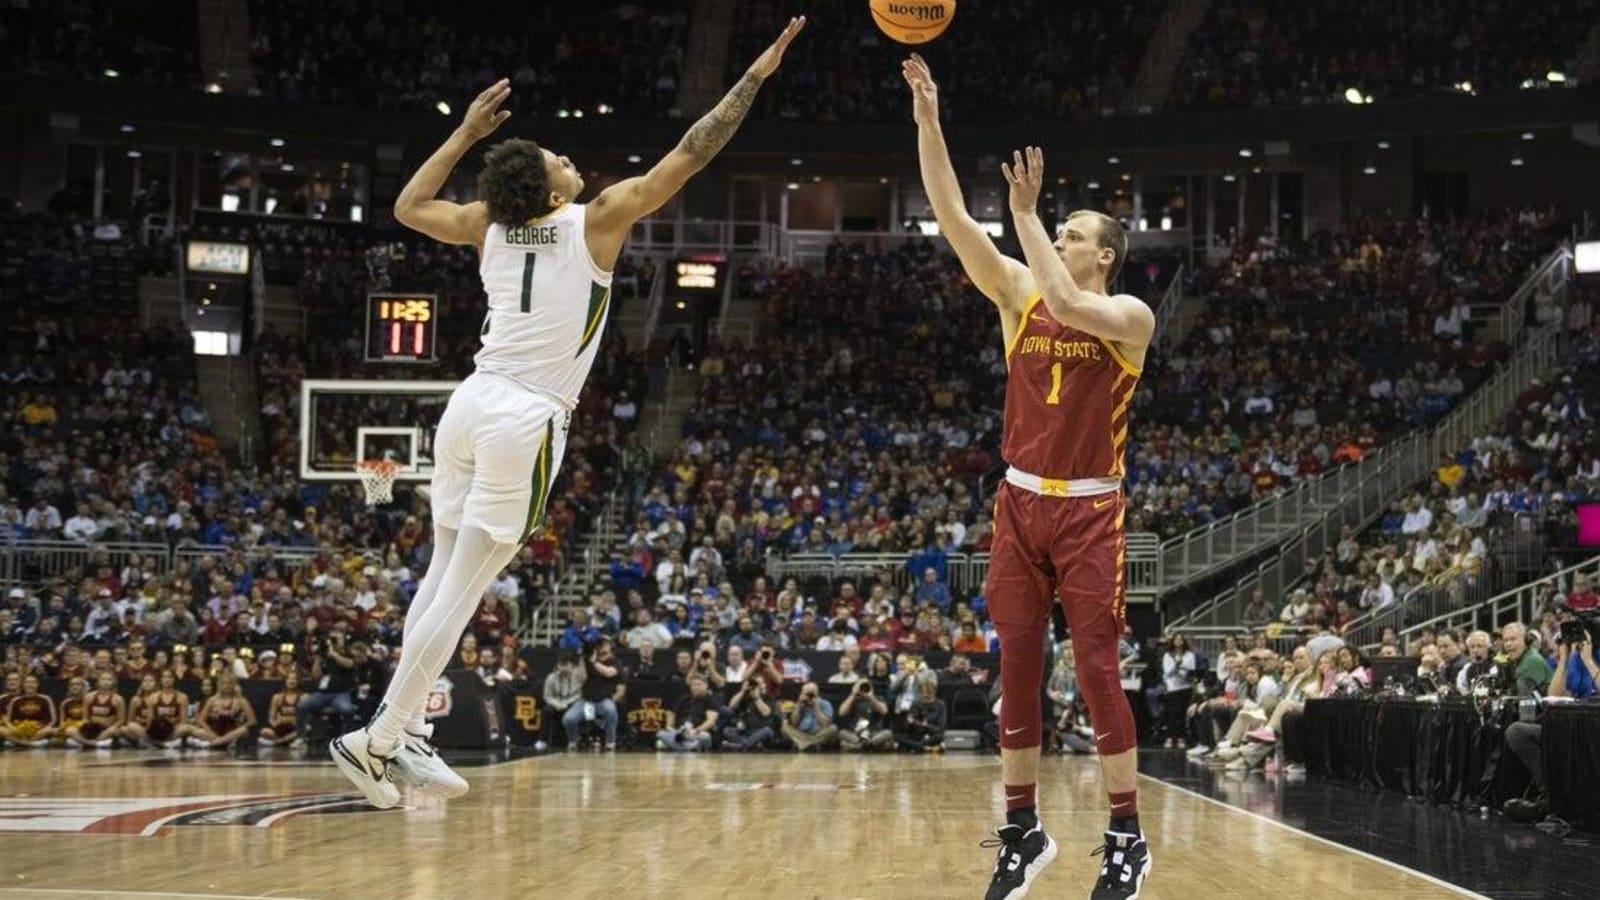 Gabe Kalscheur, Iowa State too strong for No. 10 Baylor